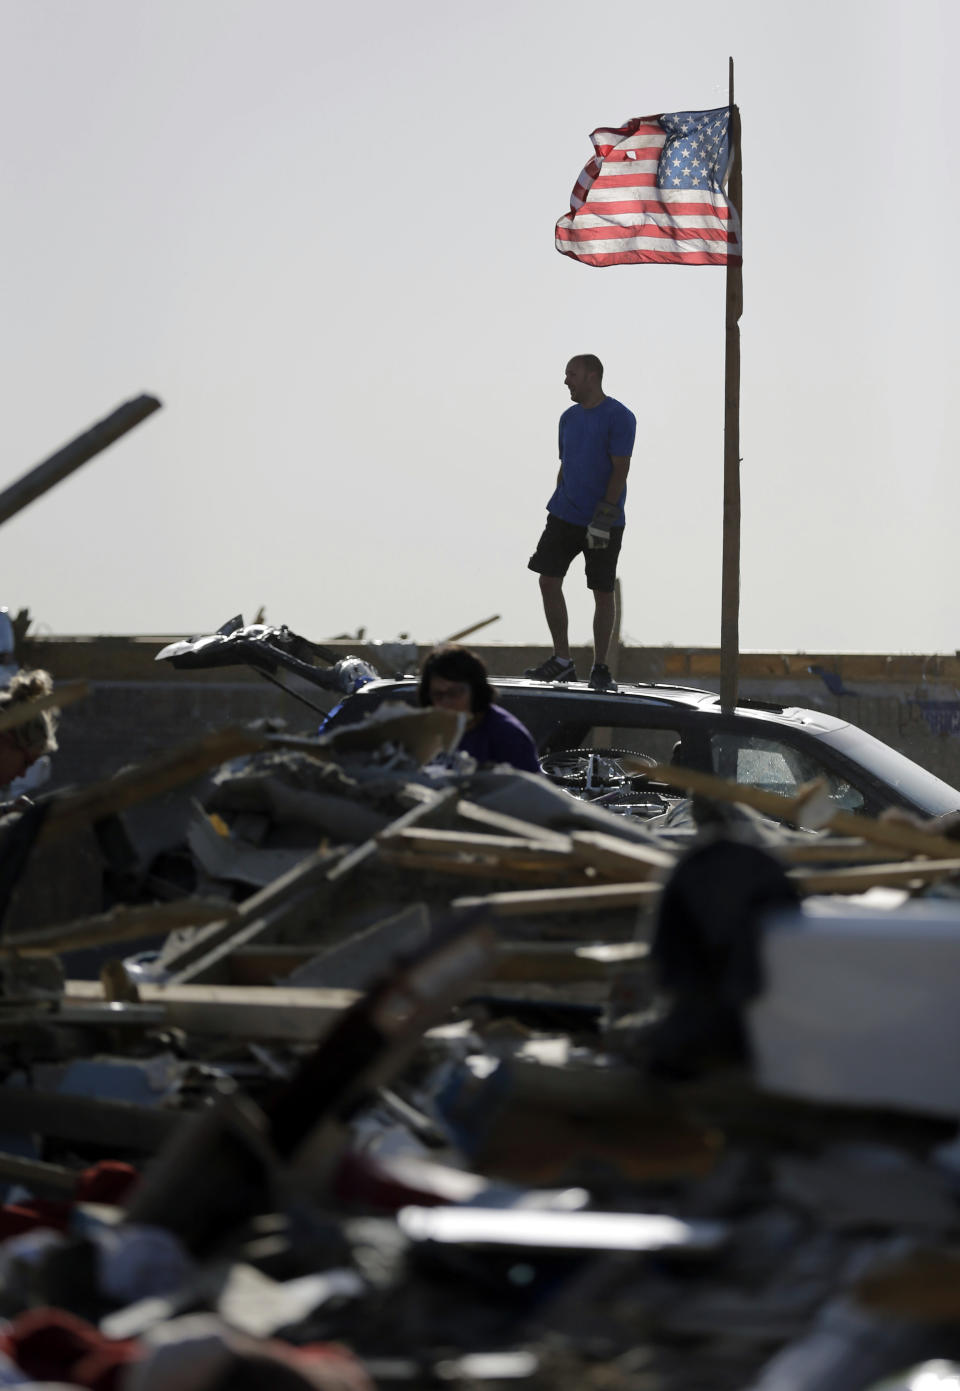 Nick Conway surveys his tornado destroyed home, Monday, April 28, 2014, in Vilonia, Ark. Arkansas Gov. Mike Beebe has asked for a Major Disaster Declaration for Faulkner County, which was hit hardest by a deadly tornado that rolled through the state. (AP Photo/Eric GayAP Photo/Eric Gay)